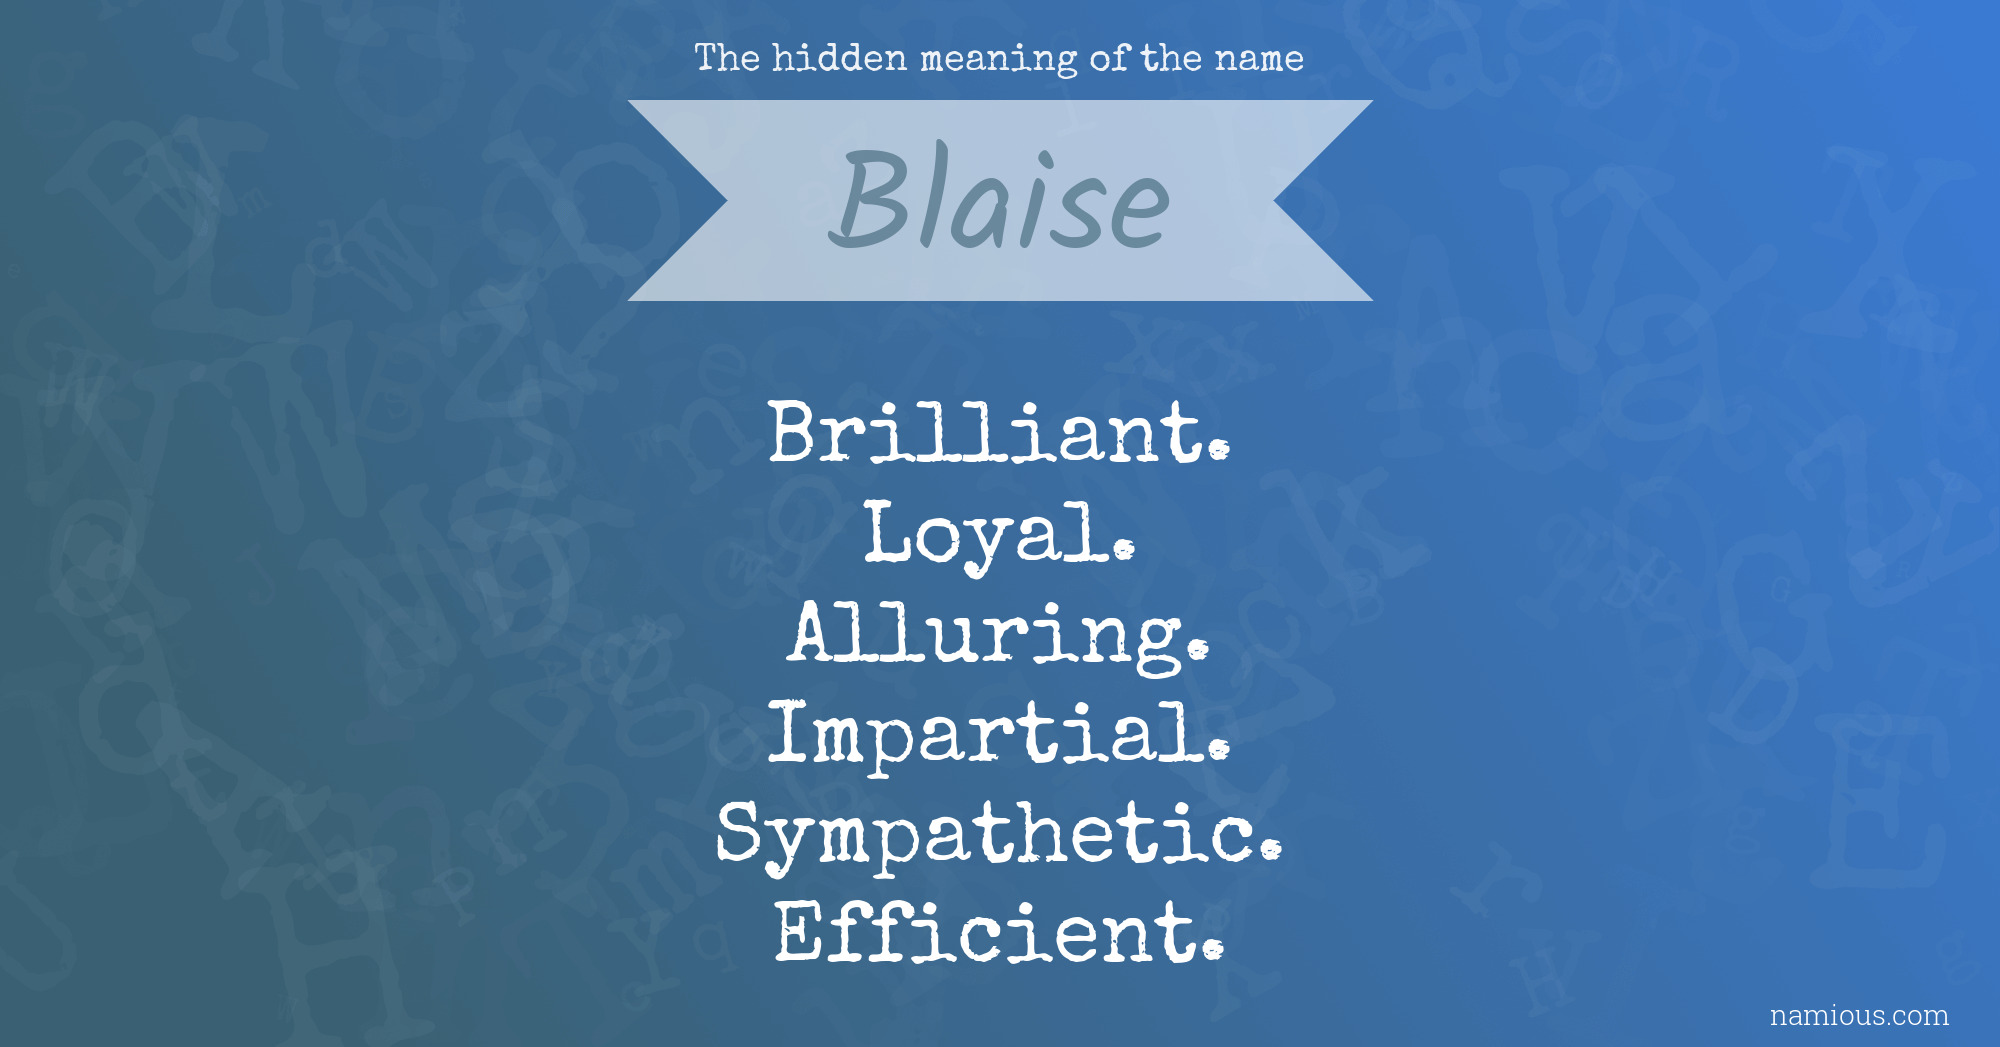 The hidden meaning of the name Blaise